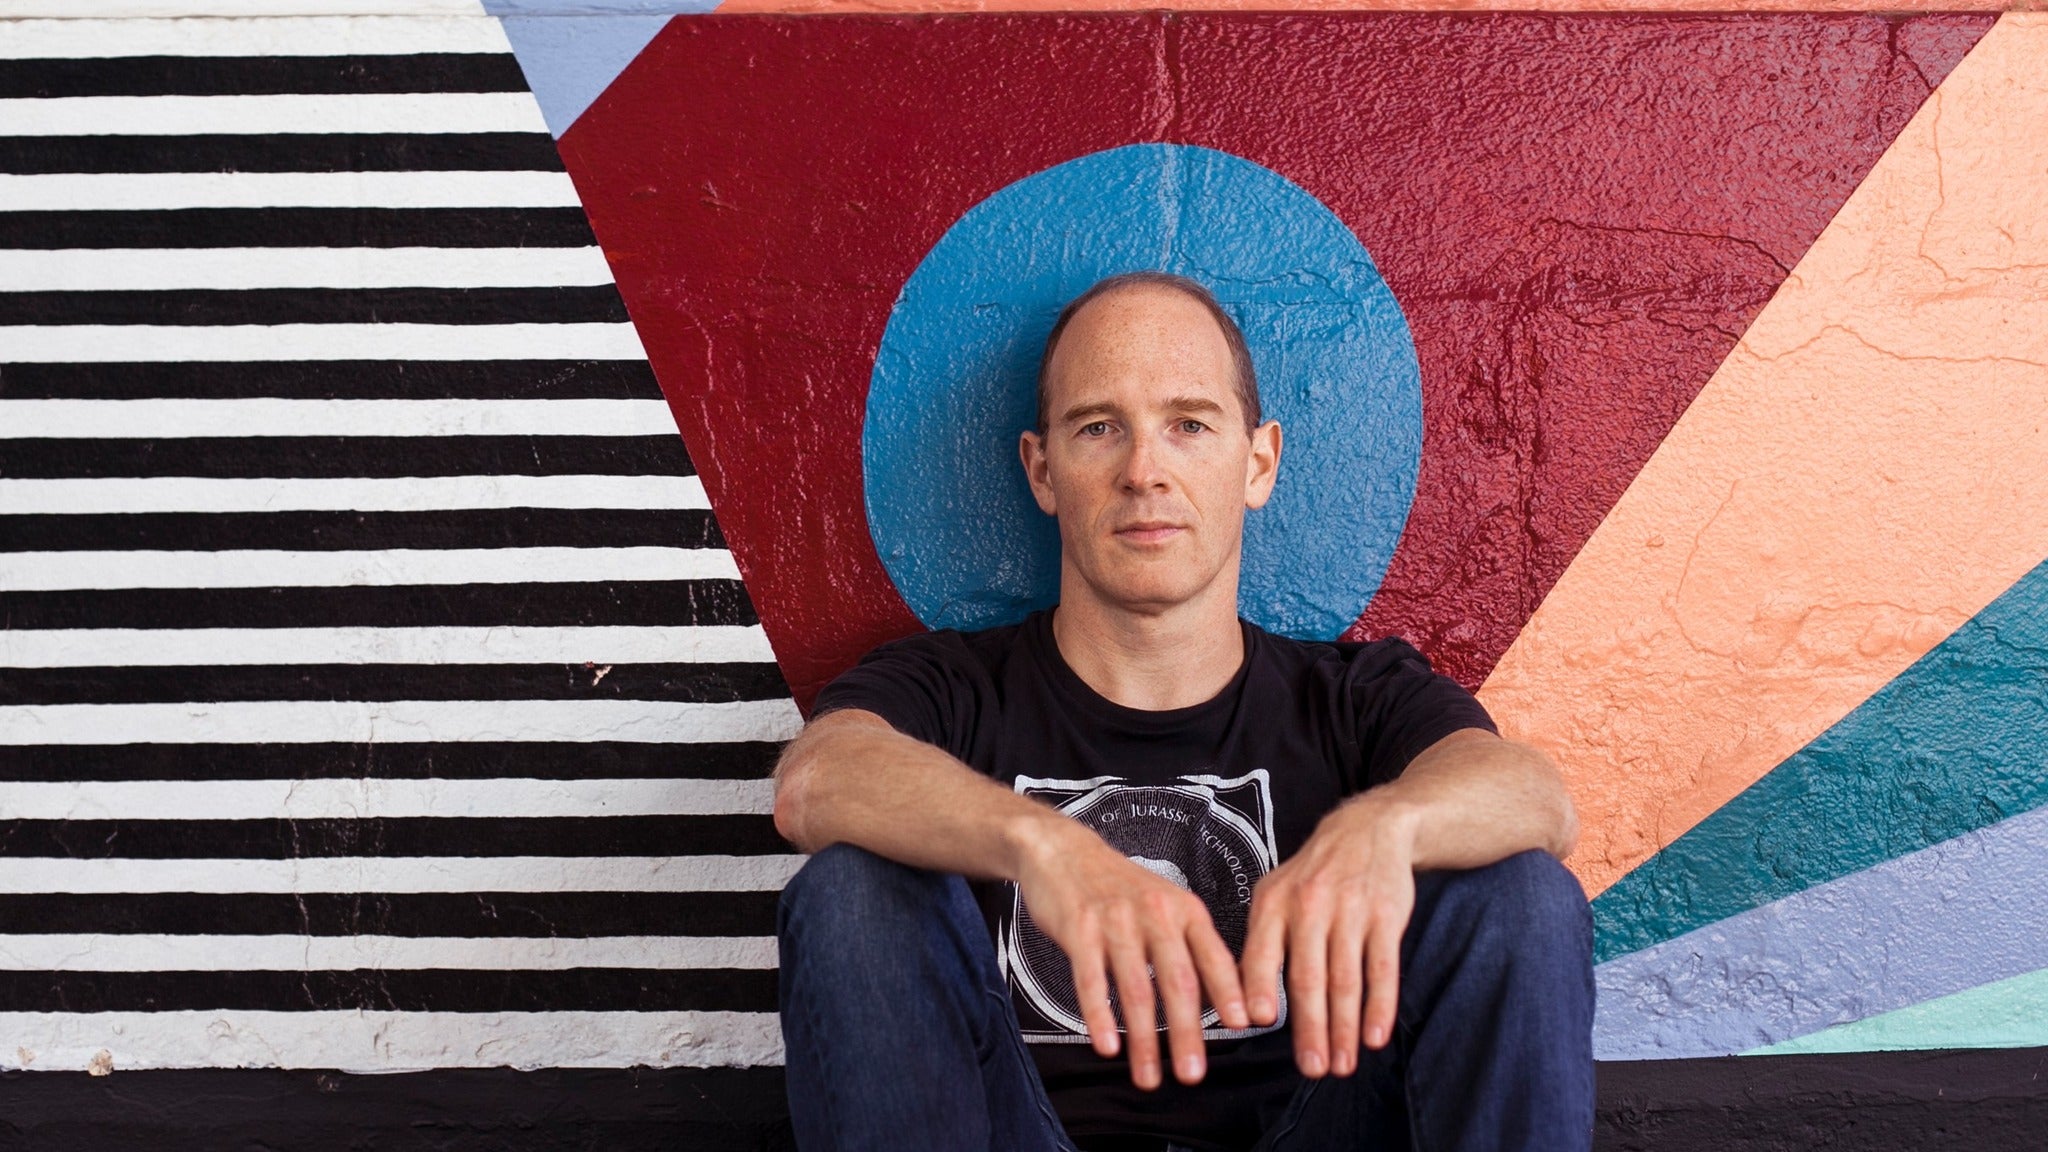 Caribou in Vancouver promo photo for Local presale offer code